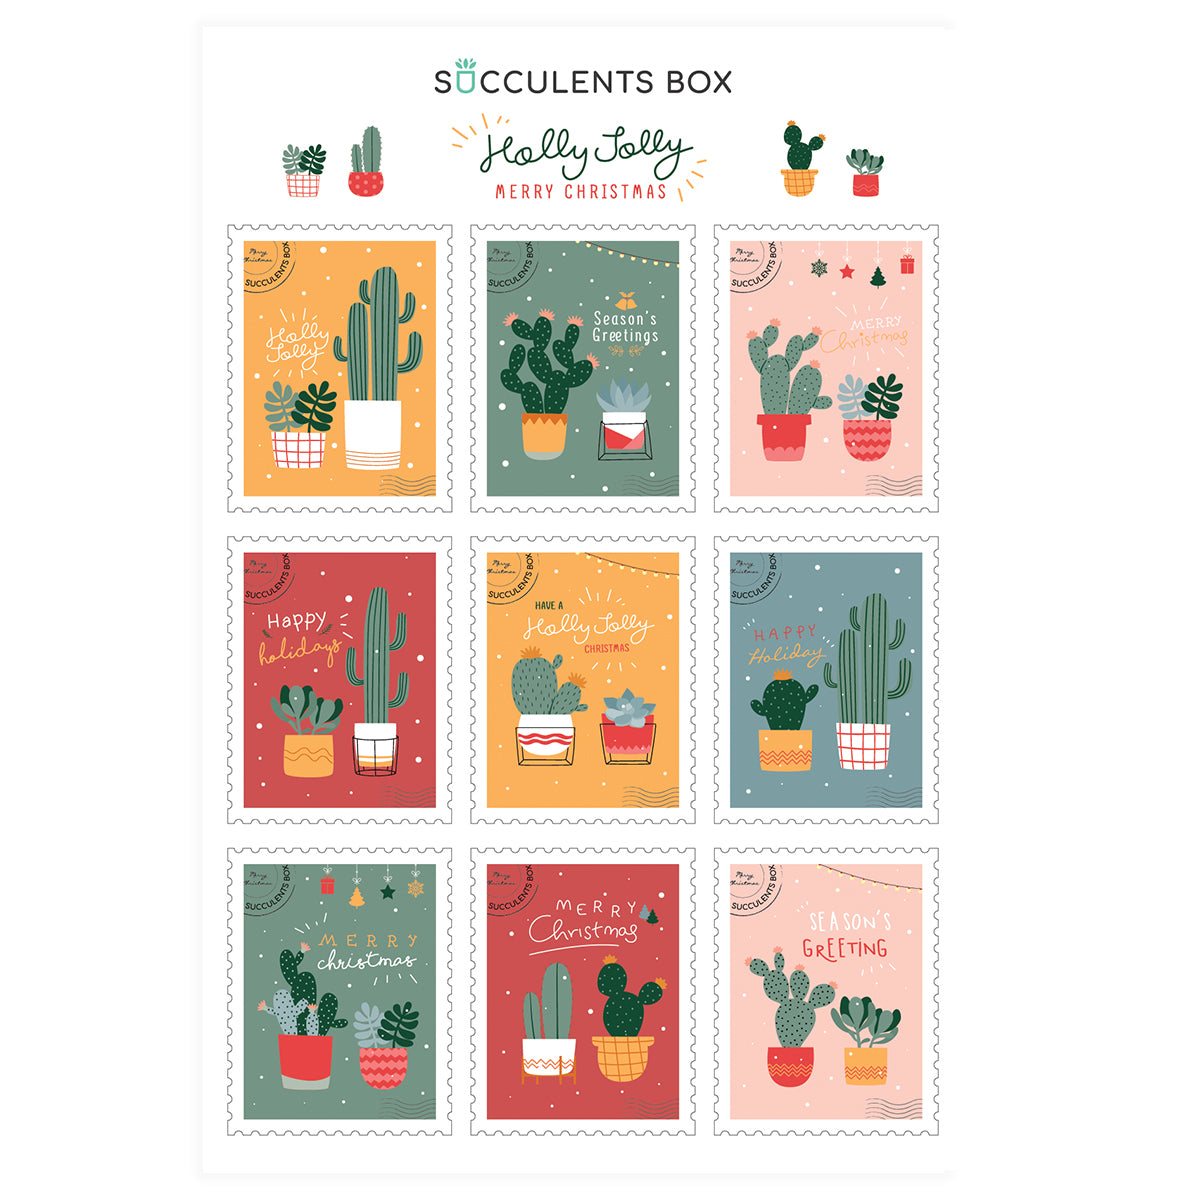 succulent stickers for sale, cactus stickers for sale, succulent craft ideas, succulent gift ideas, cute plant stickers, christmas stickers